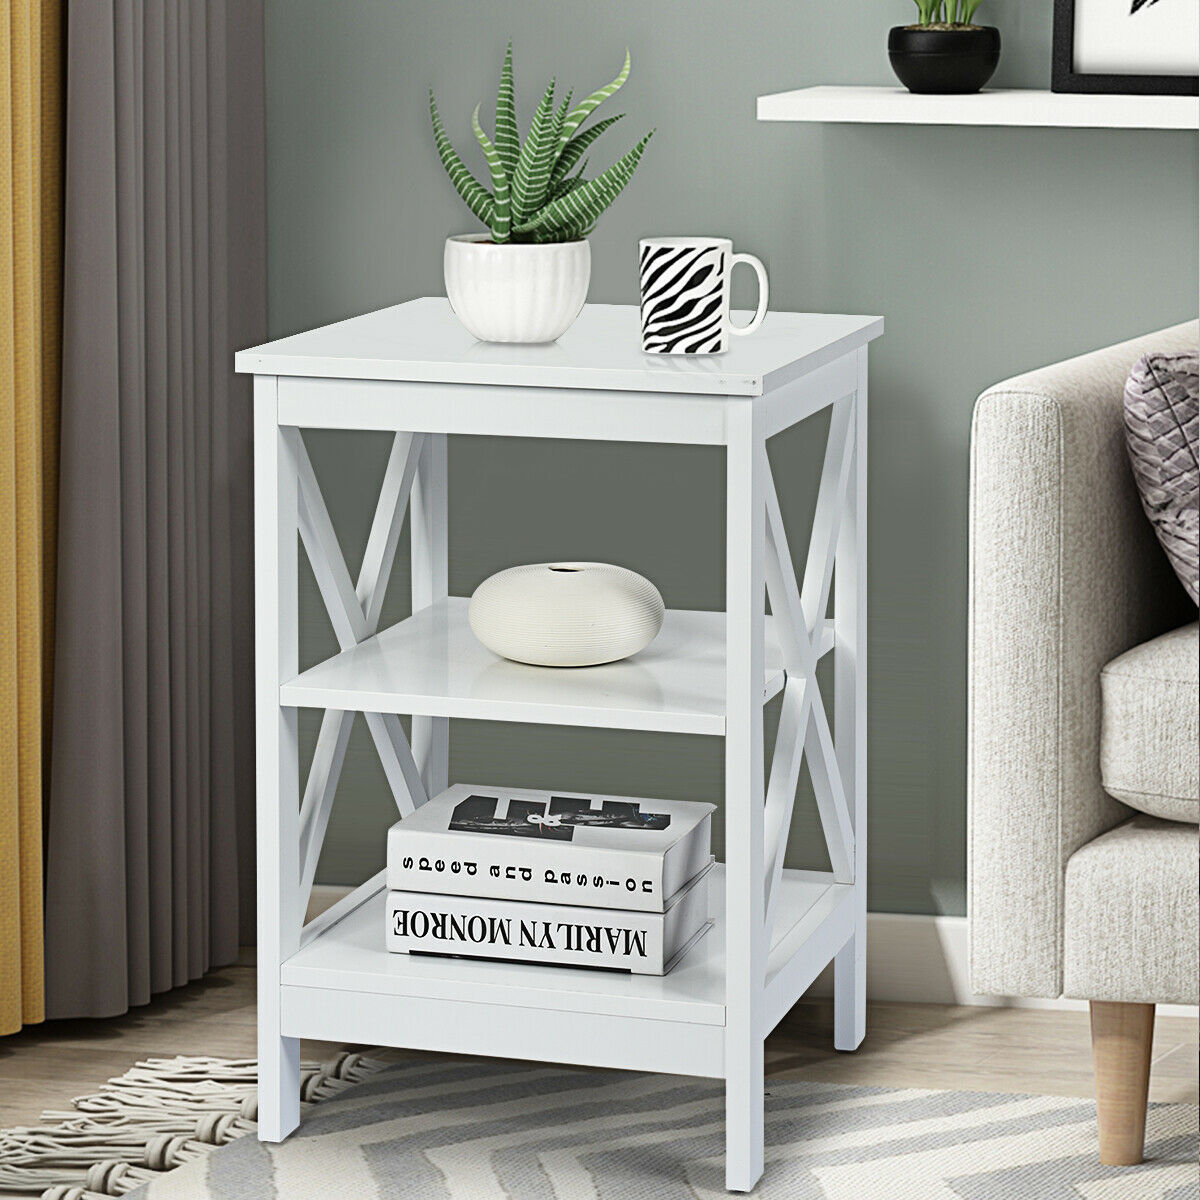 3-Tier Wooden Bedside Table Nightstand Storage Cabinets-White